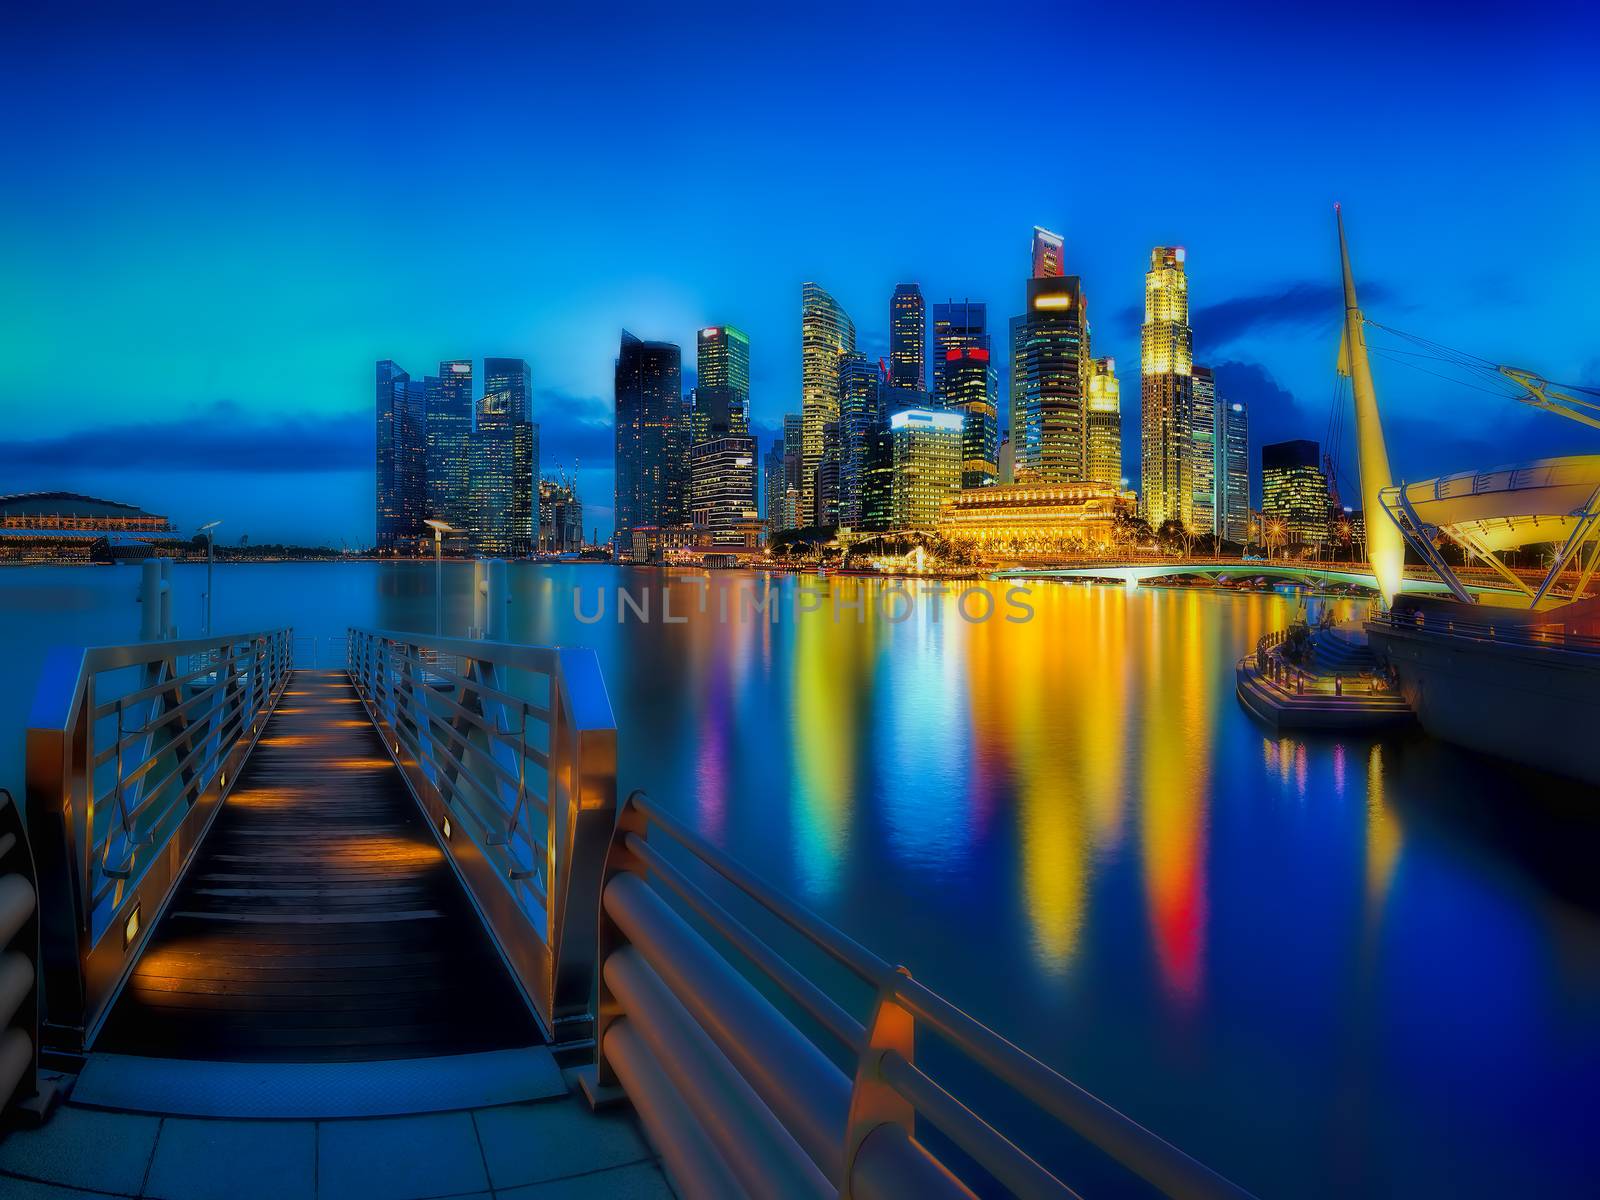 Singapore city skyline seen from the pier